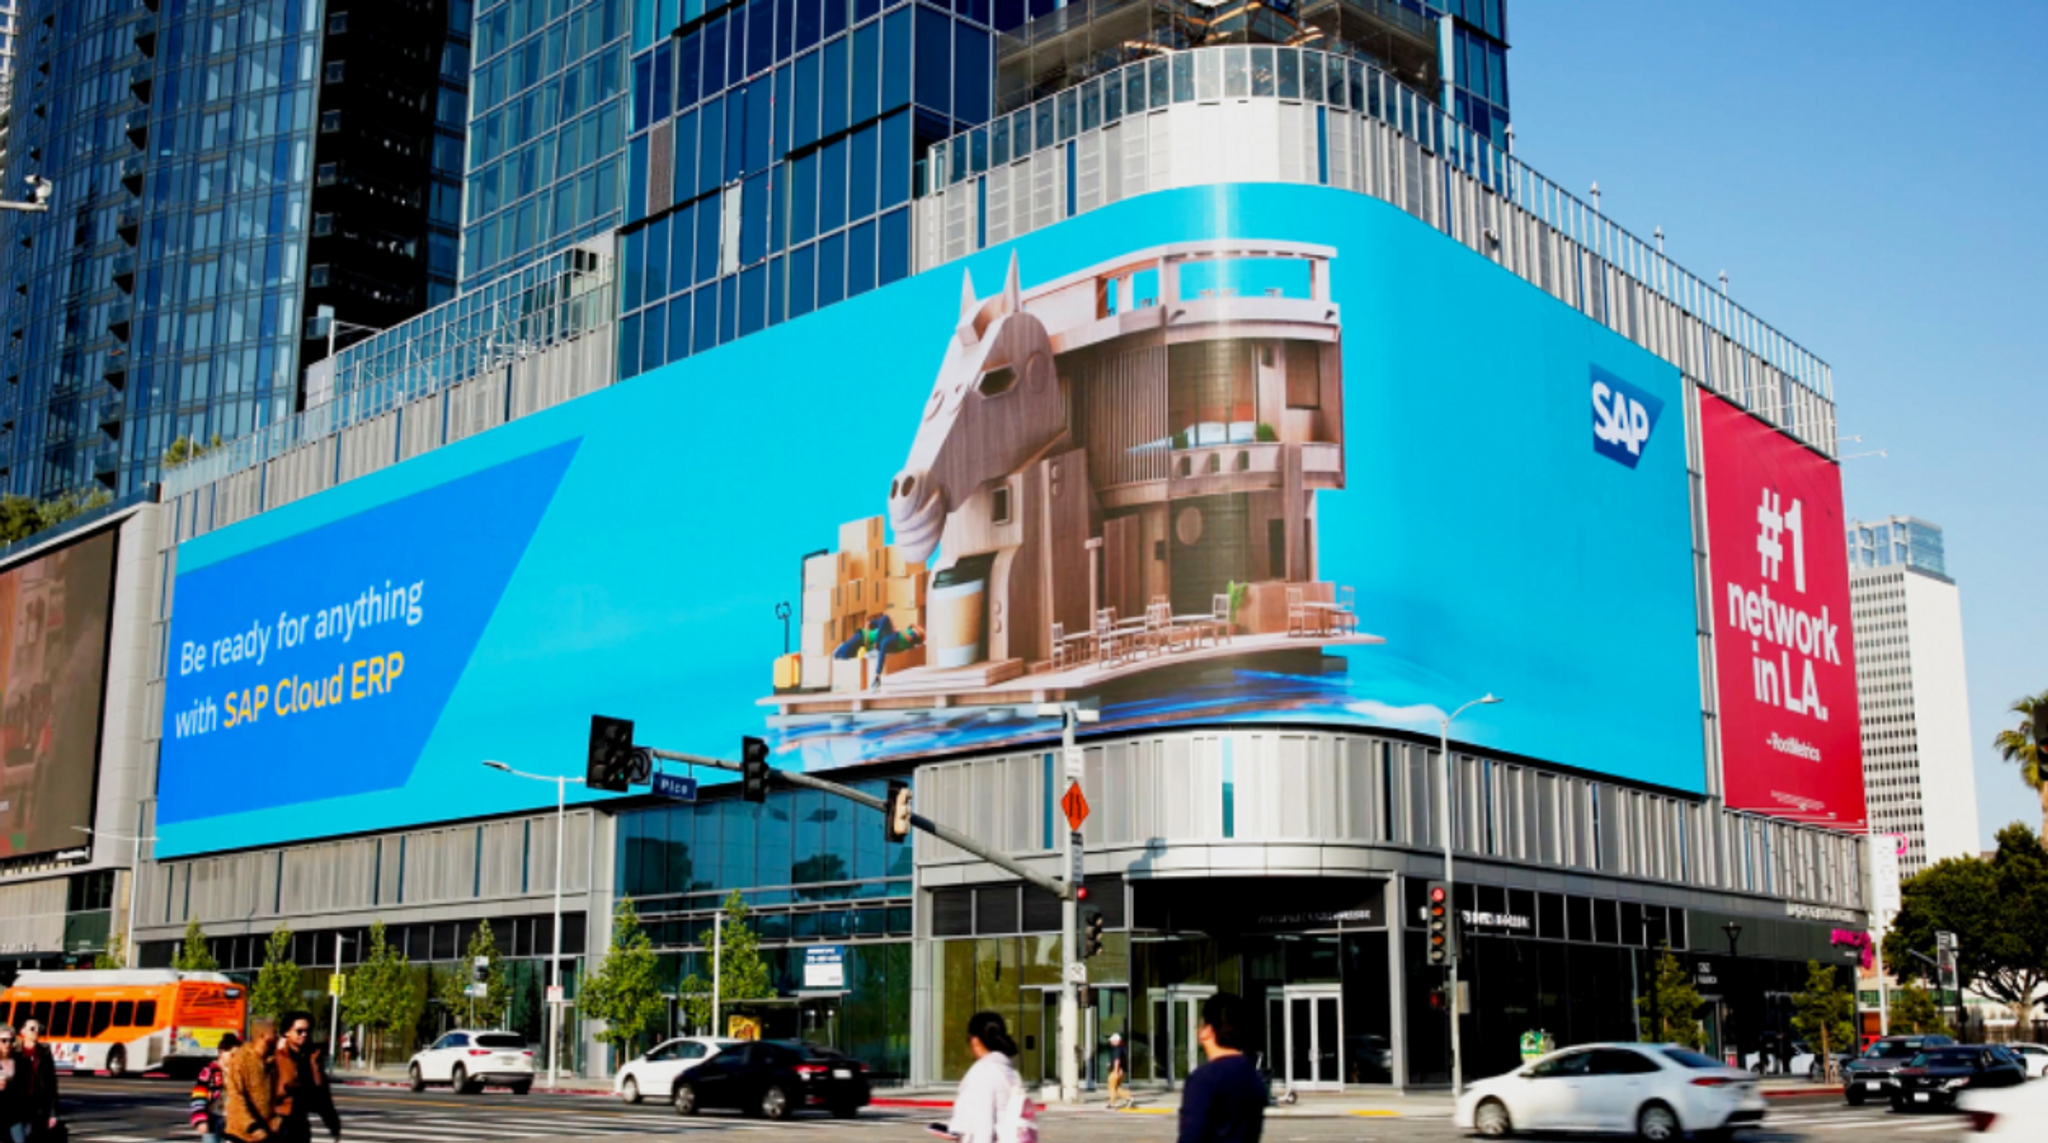 SAP's AI billboards signal transformation in advertising